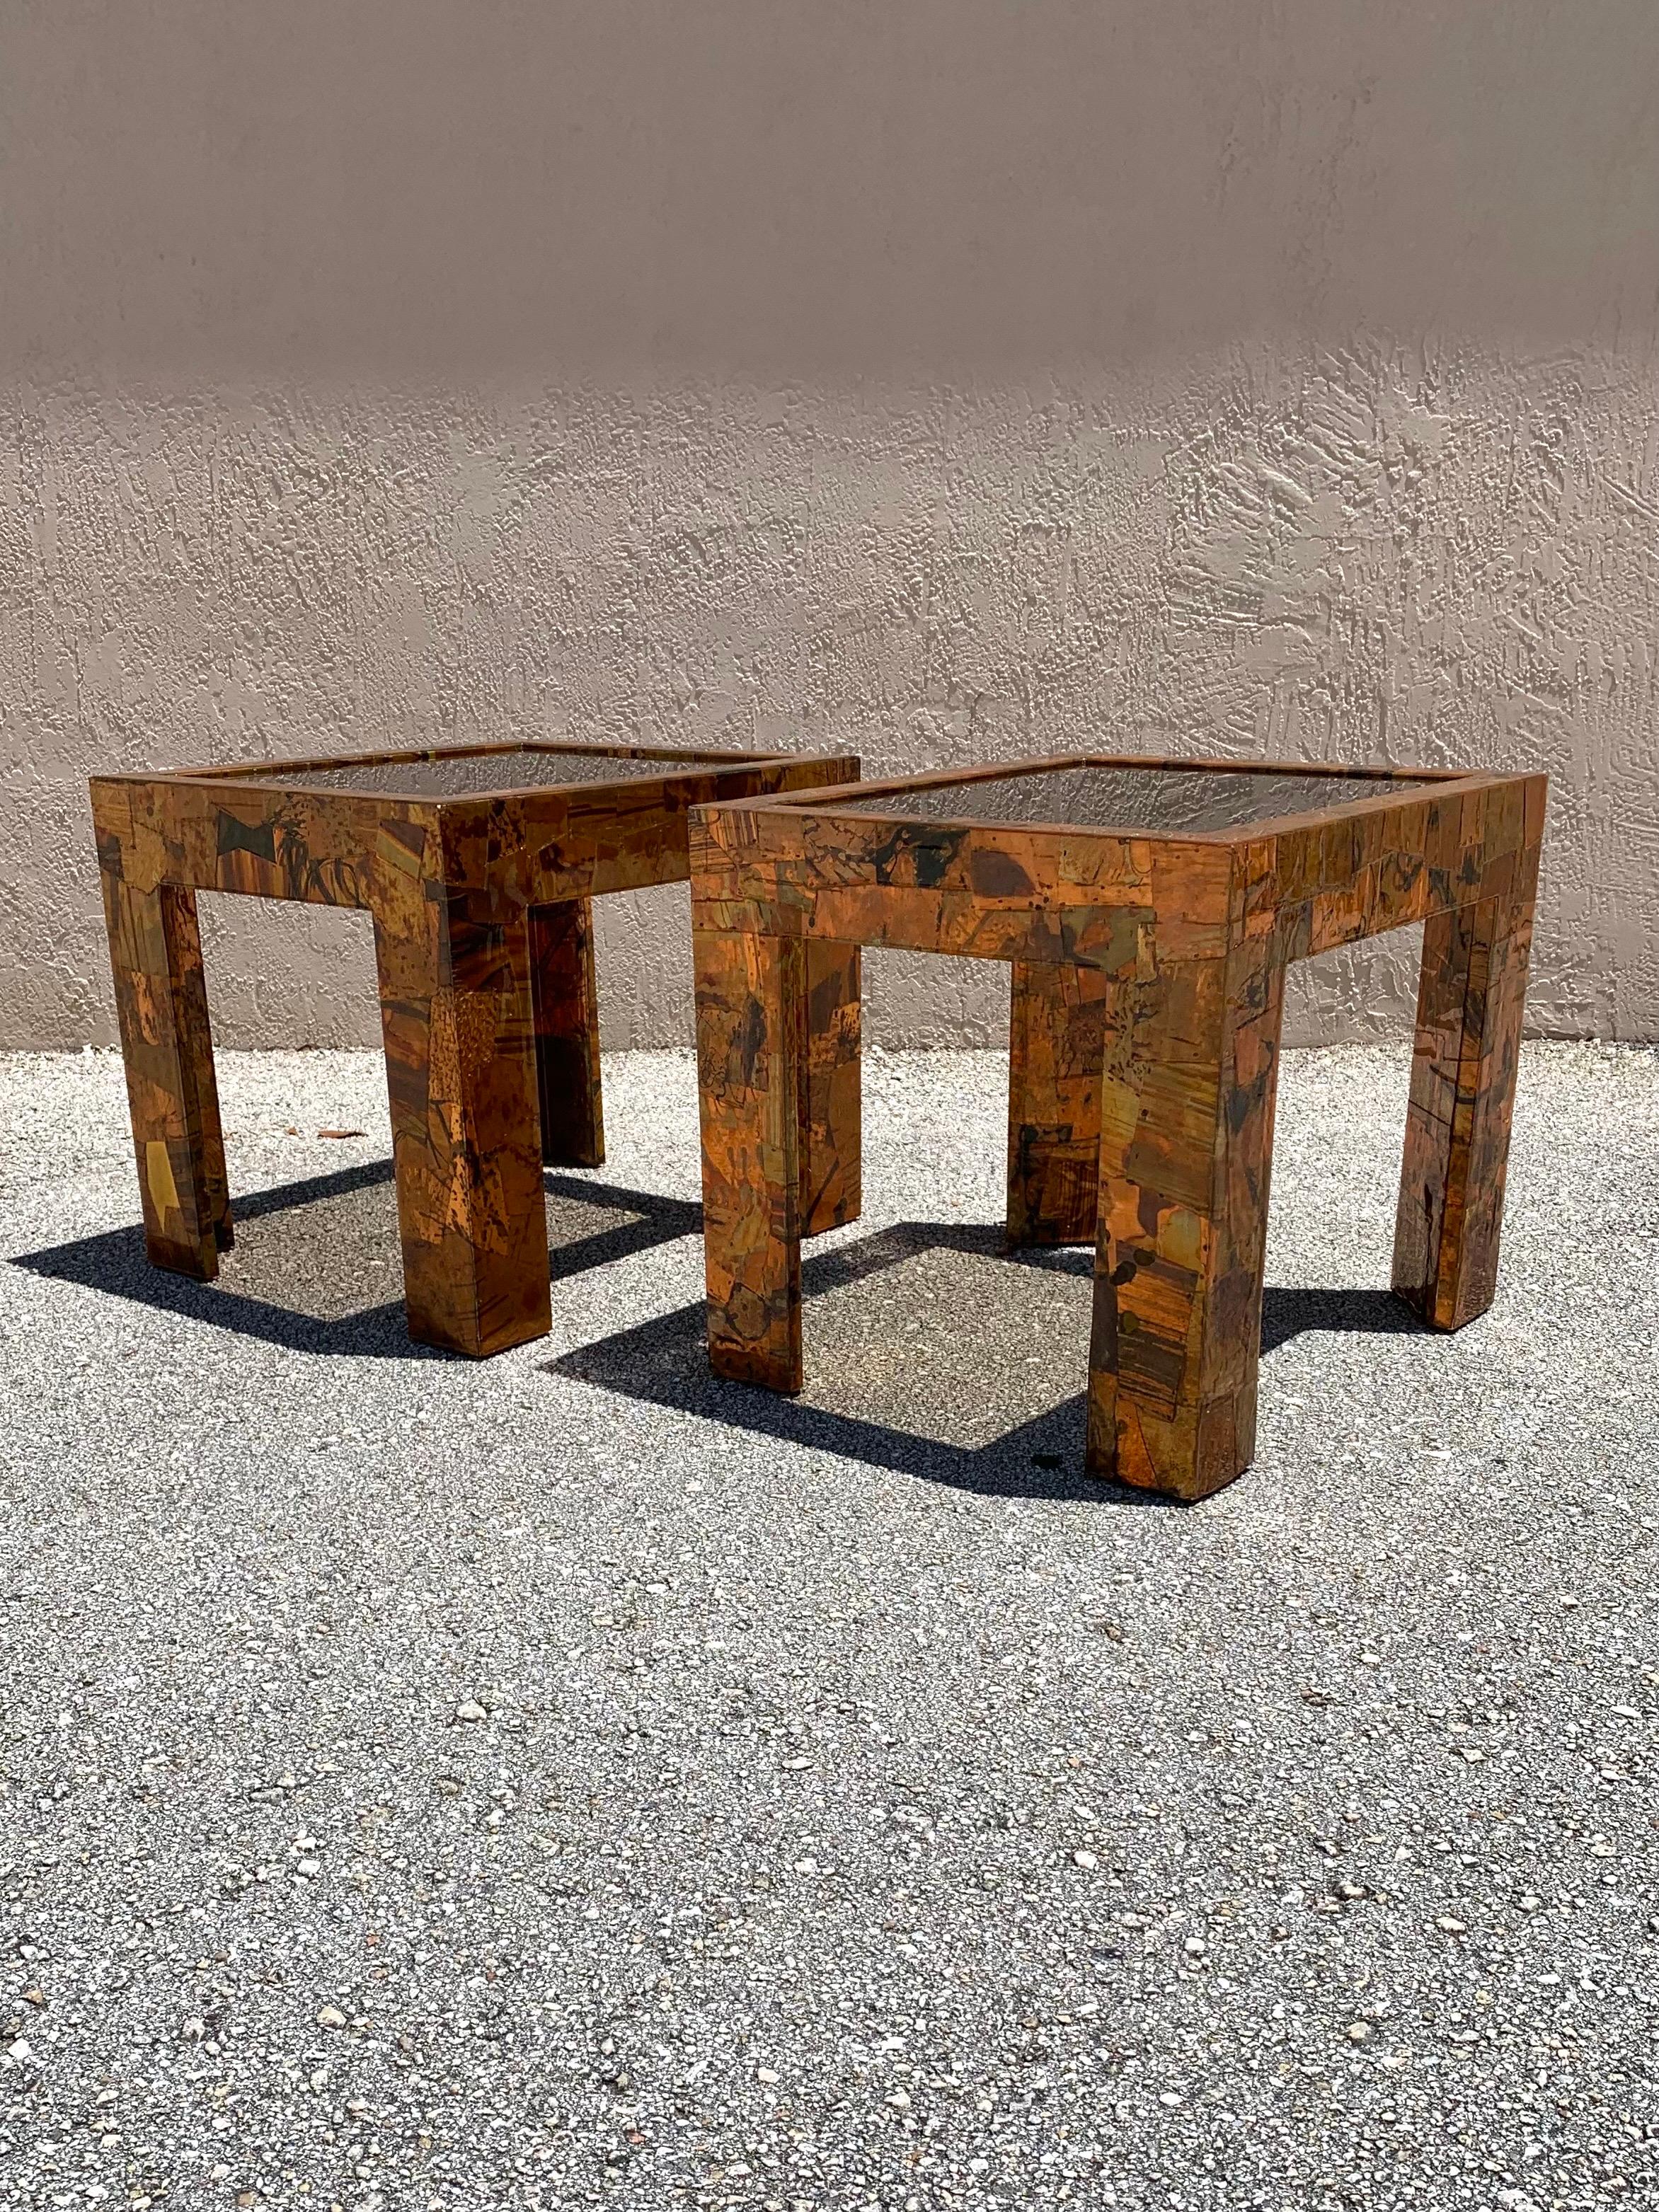 Beautiful pair of studio made copper and brass coffee tables. High end materials and finish made to have a clean yet brutalist type flair. The artist used different pieces of textured and patinated copper and clean brass hand picked and hand cut to